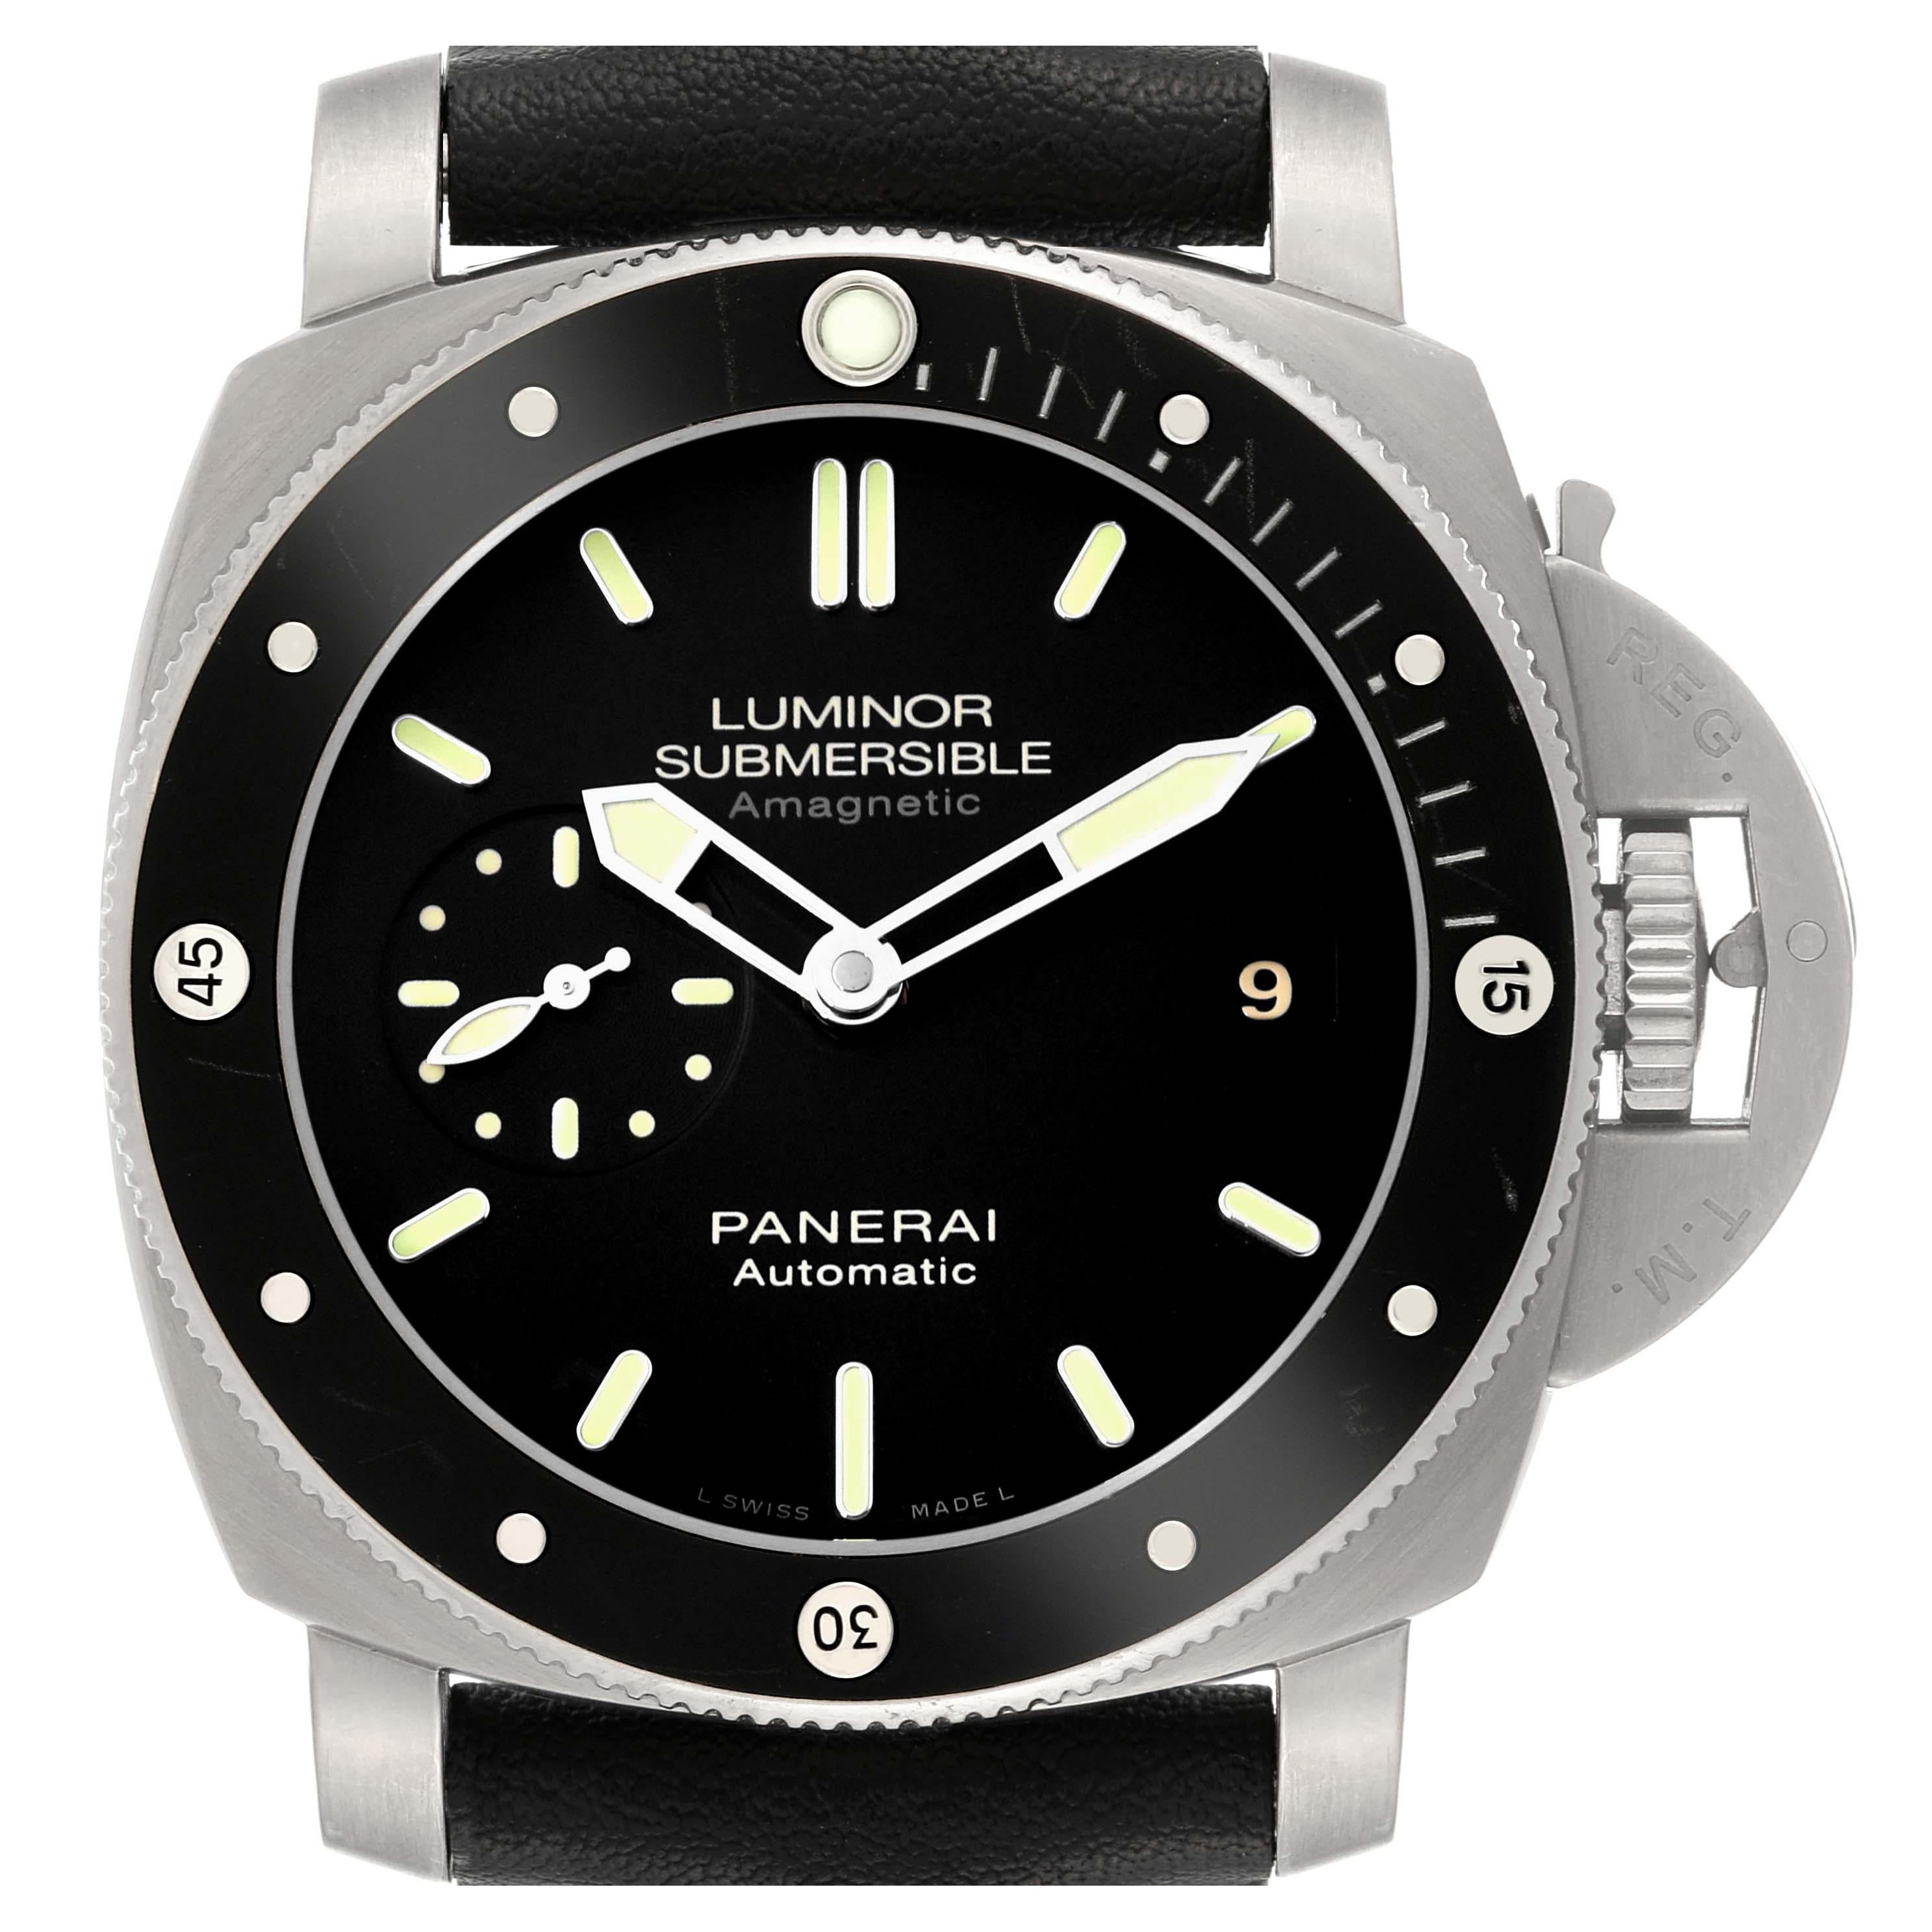 Panerai Luminor Submersible 1950 Titanium Amagnetic Watch PAM00389 Box Papers For Sale